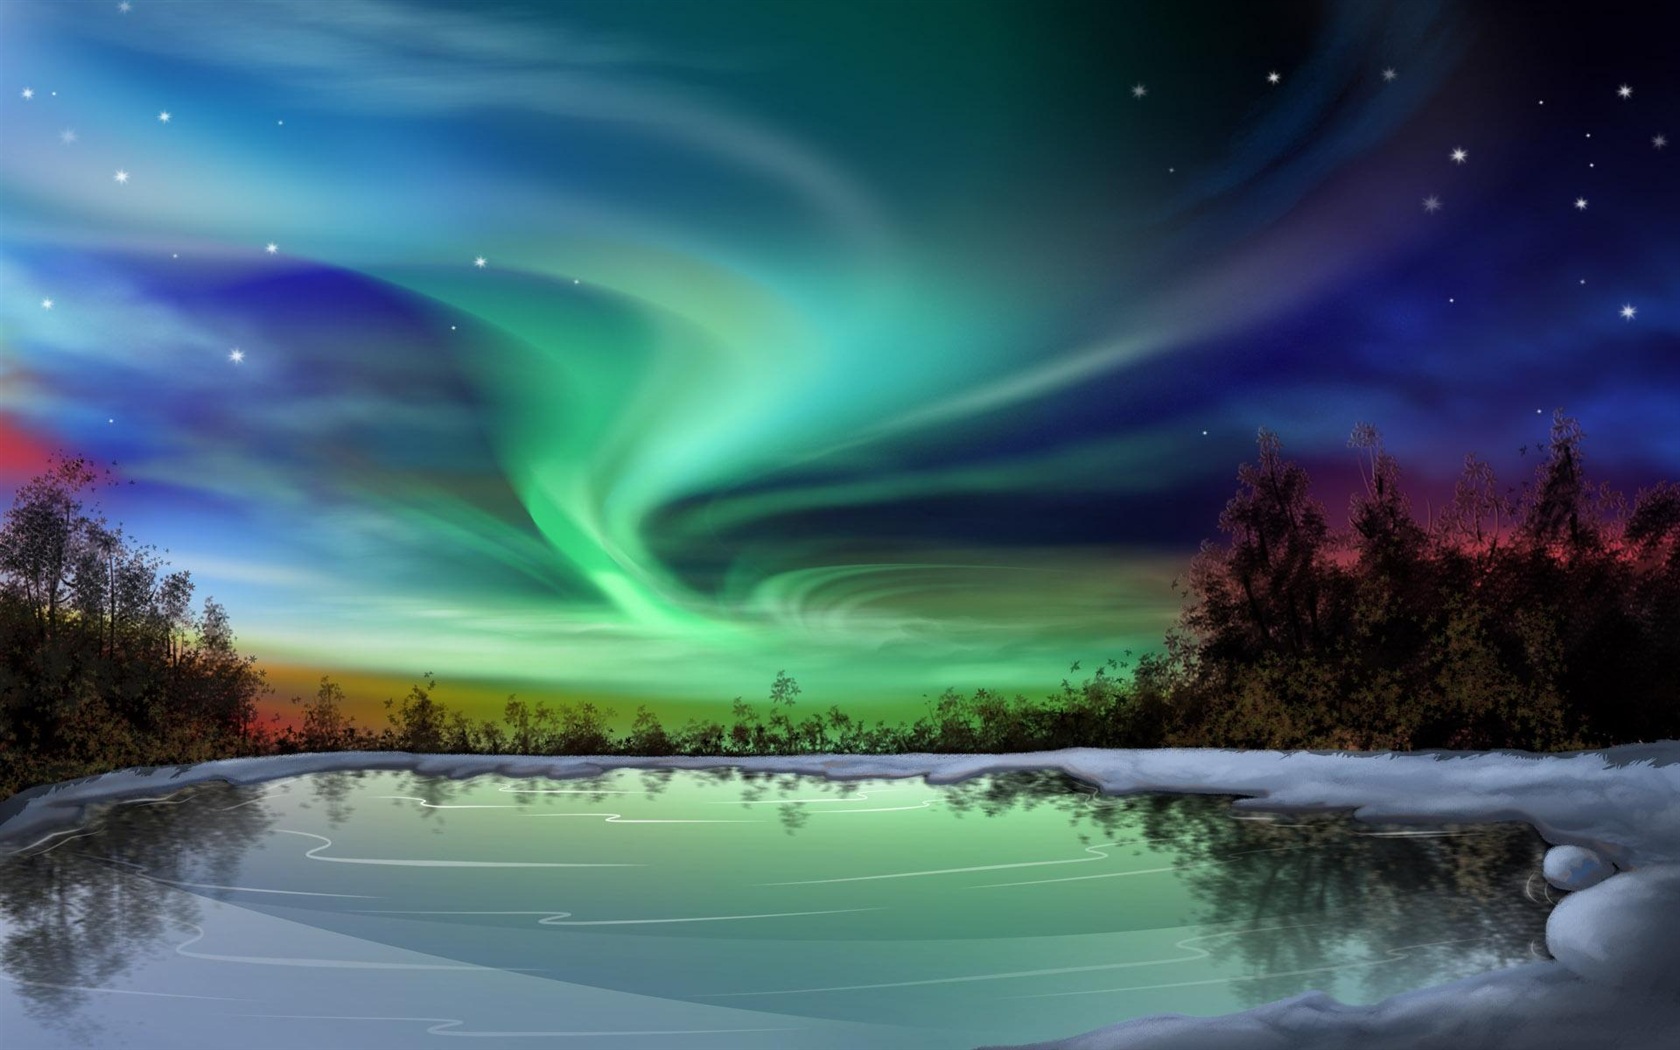 Natural wonders of the Northern Lights HD Wallpaper (2) #25 - 1680x1050